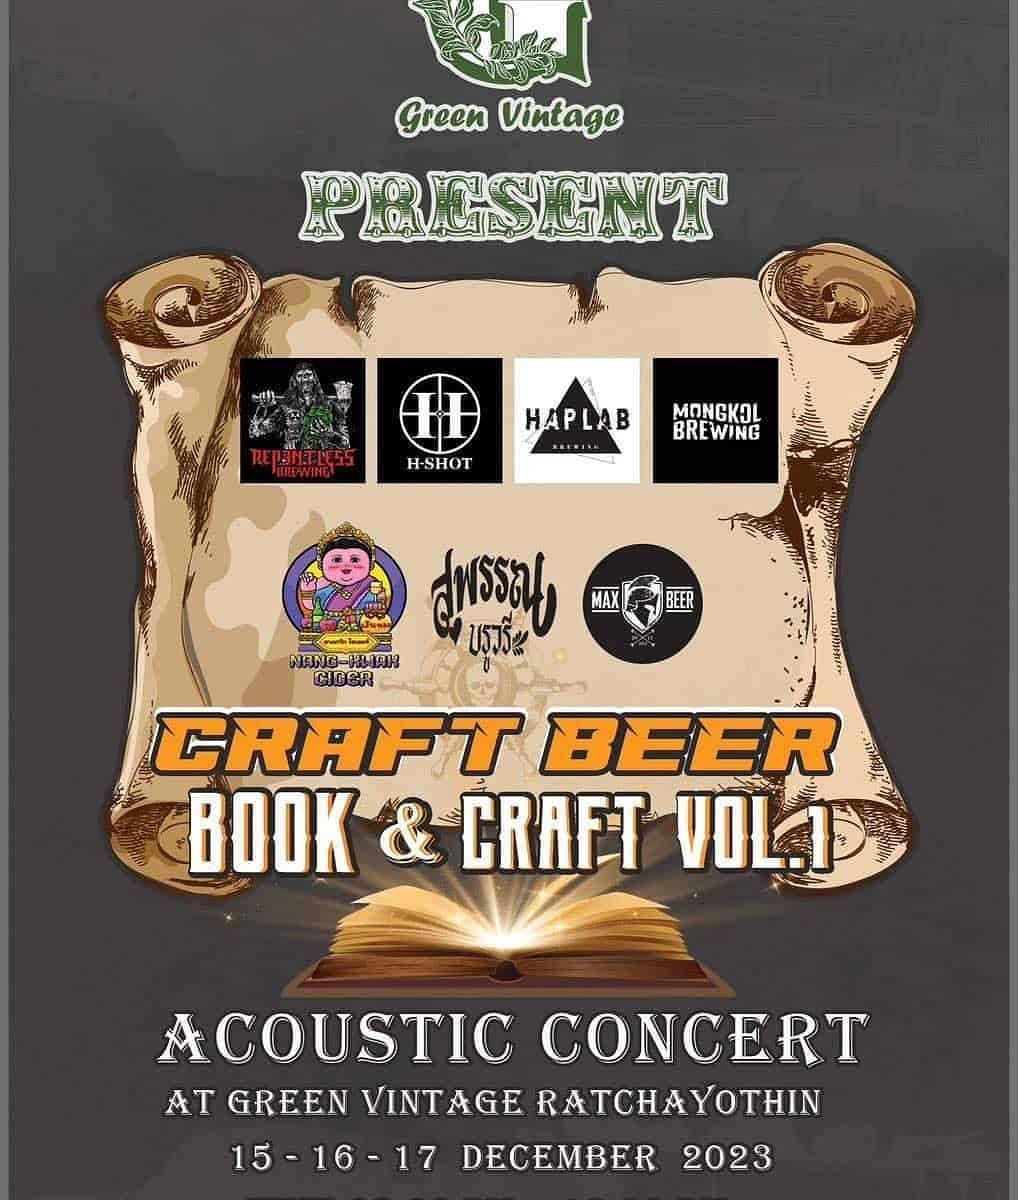 Green Vintage craft beer and books event in Bangkok Thailand